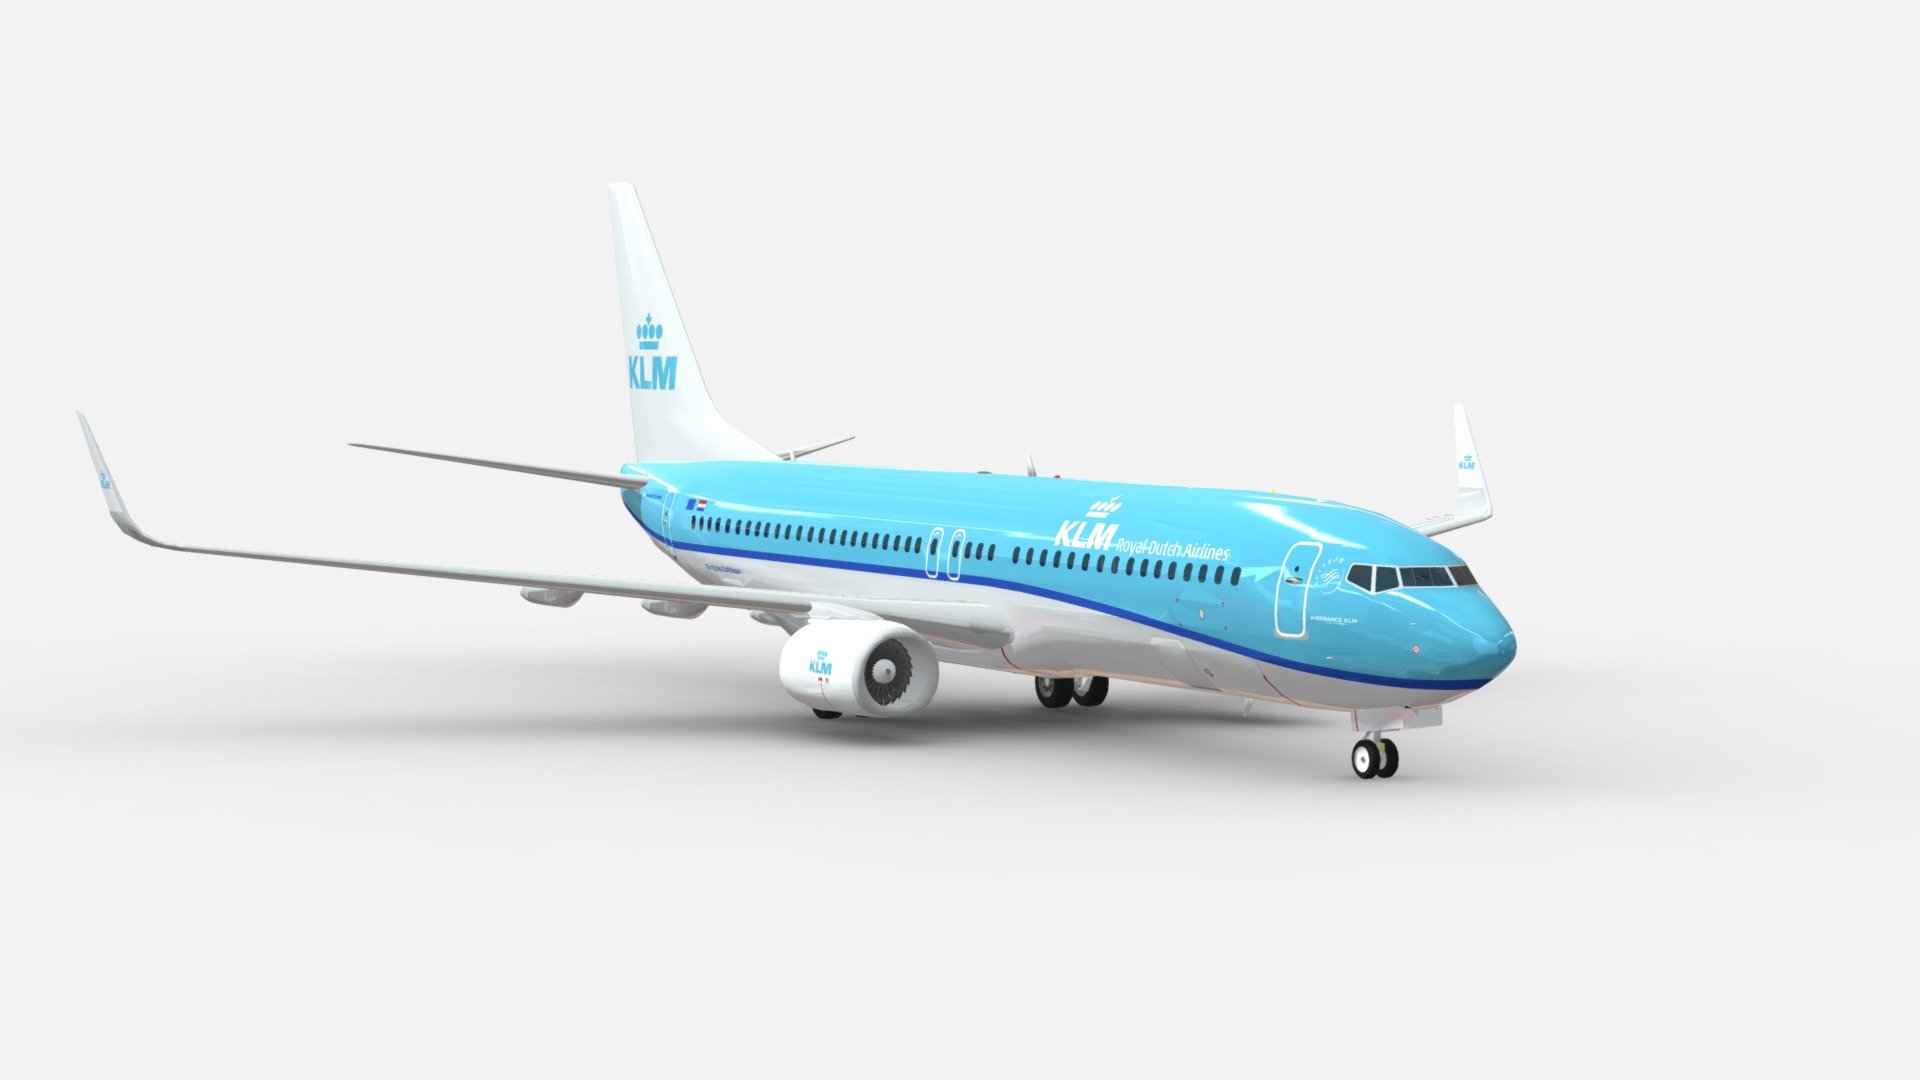 This 3D model shows a Boeing 737-800 aircraft in the KLM airline livery. It is a popular aircraft in the aviation industry, with impressive range and fuel efficiency. This model is carefully made, maintaining proportions and details in accordance with the original model. Perfect for use in aviation-related projects, simulations and spatial visualizations.

see all collecrion: https://skfb.ly/oOsEV - 3d model boeing KLM 737 8K2 - Buy Royalty Free 3D model by zizian 3d model